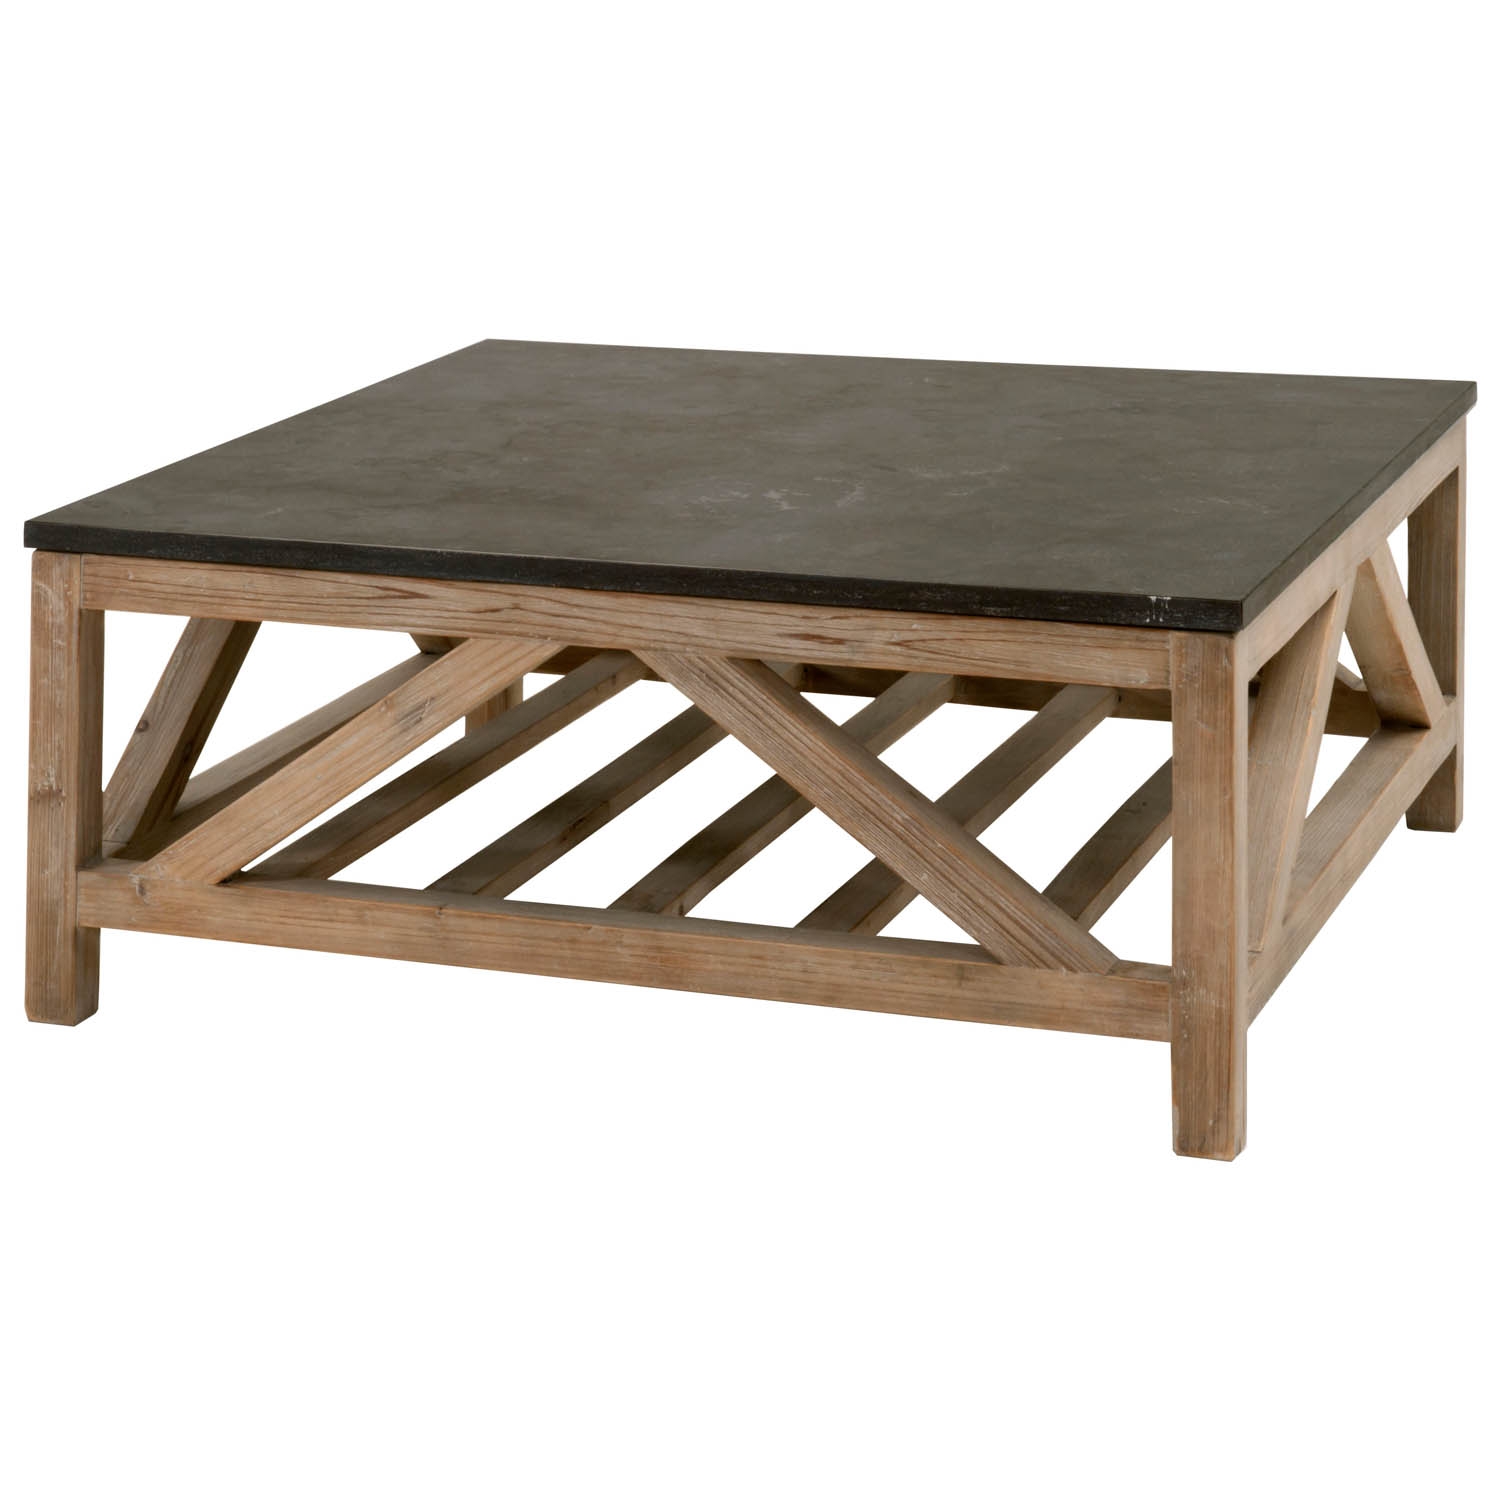 Blue Stone Square Coffee Table - Image 1